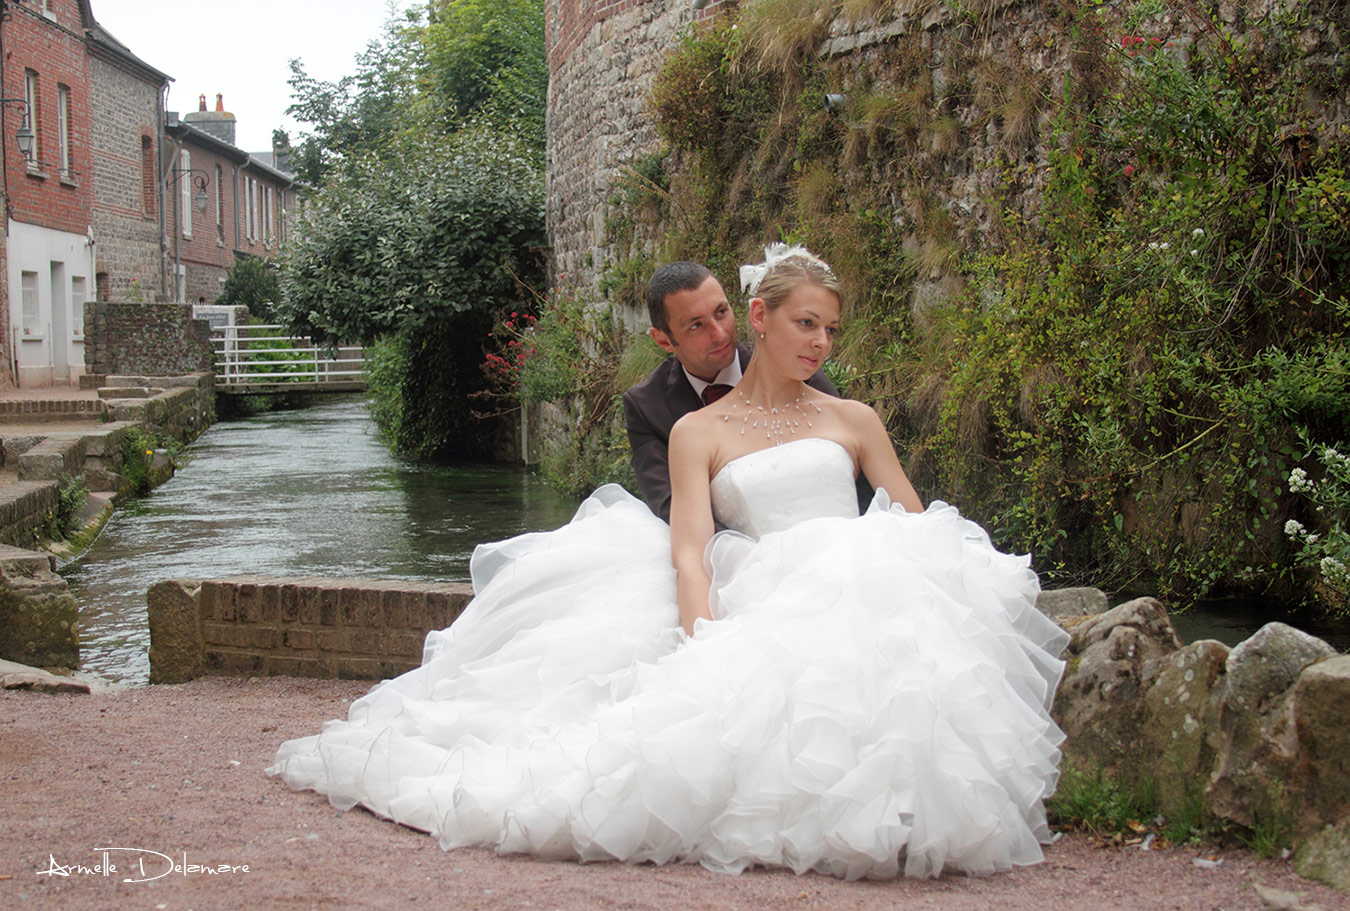 Armelle Delamare Photographe Pavilly Photographie Mariage Reportage